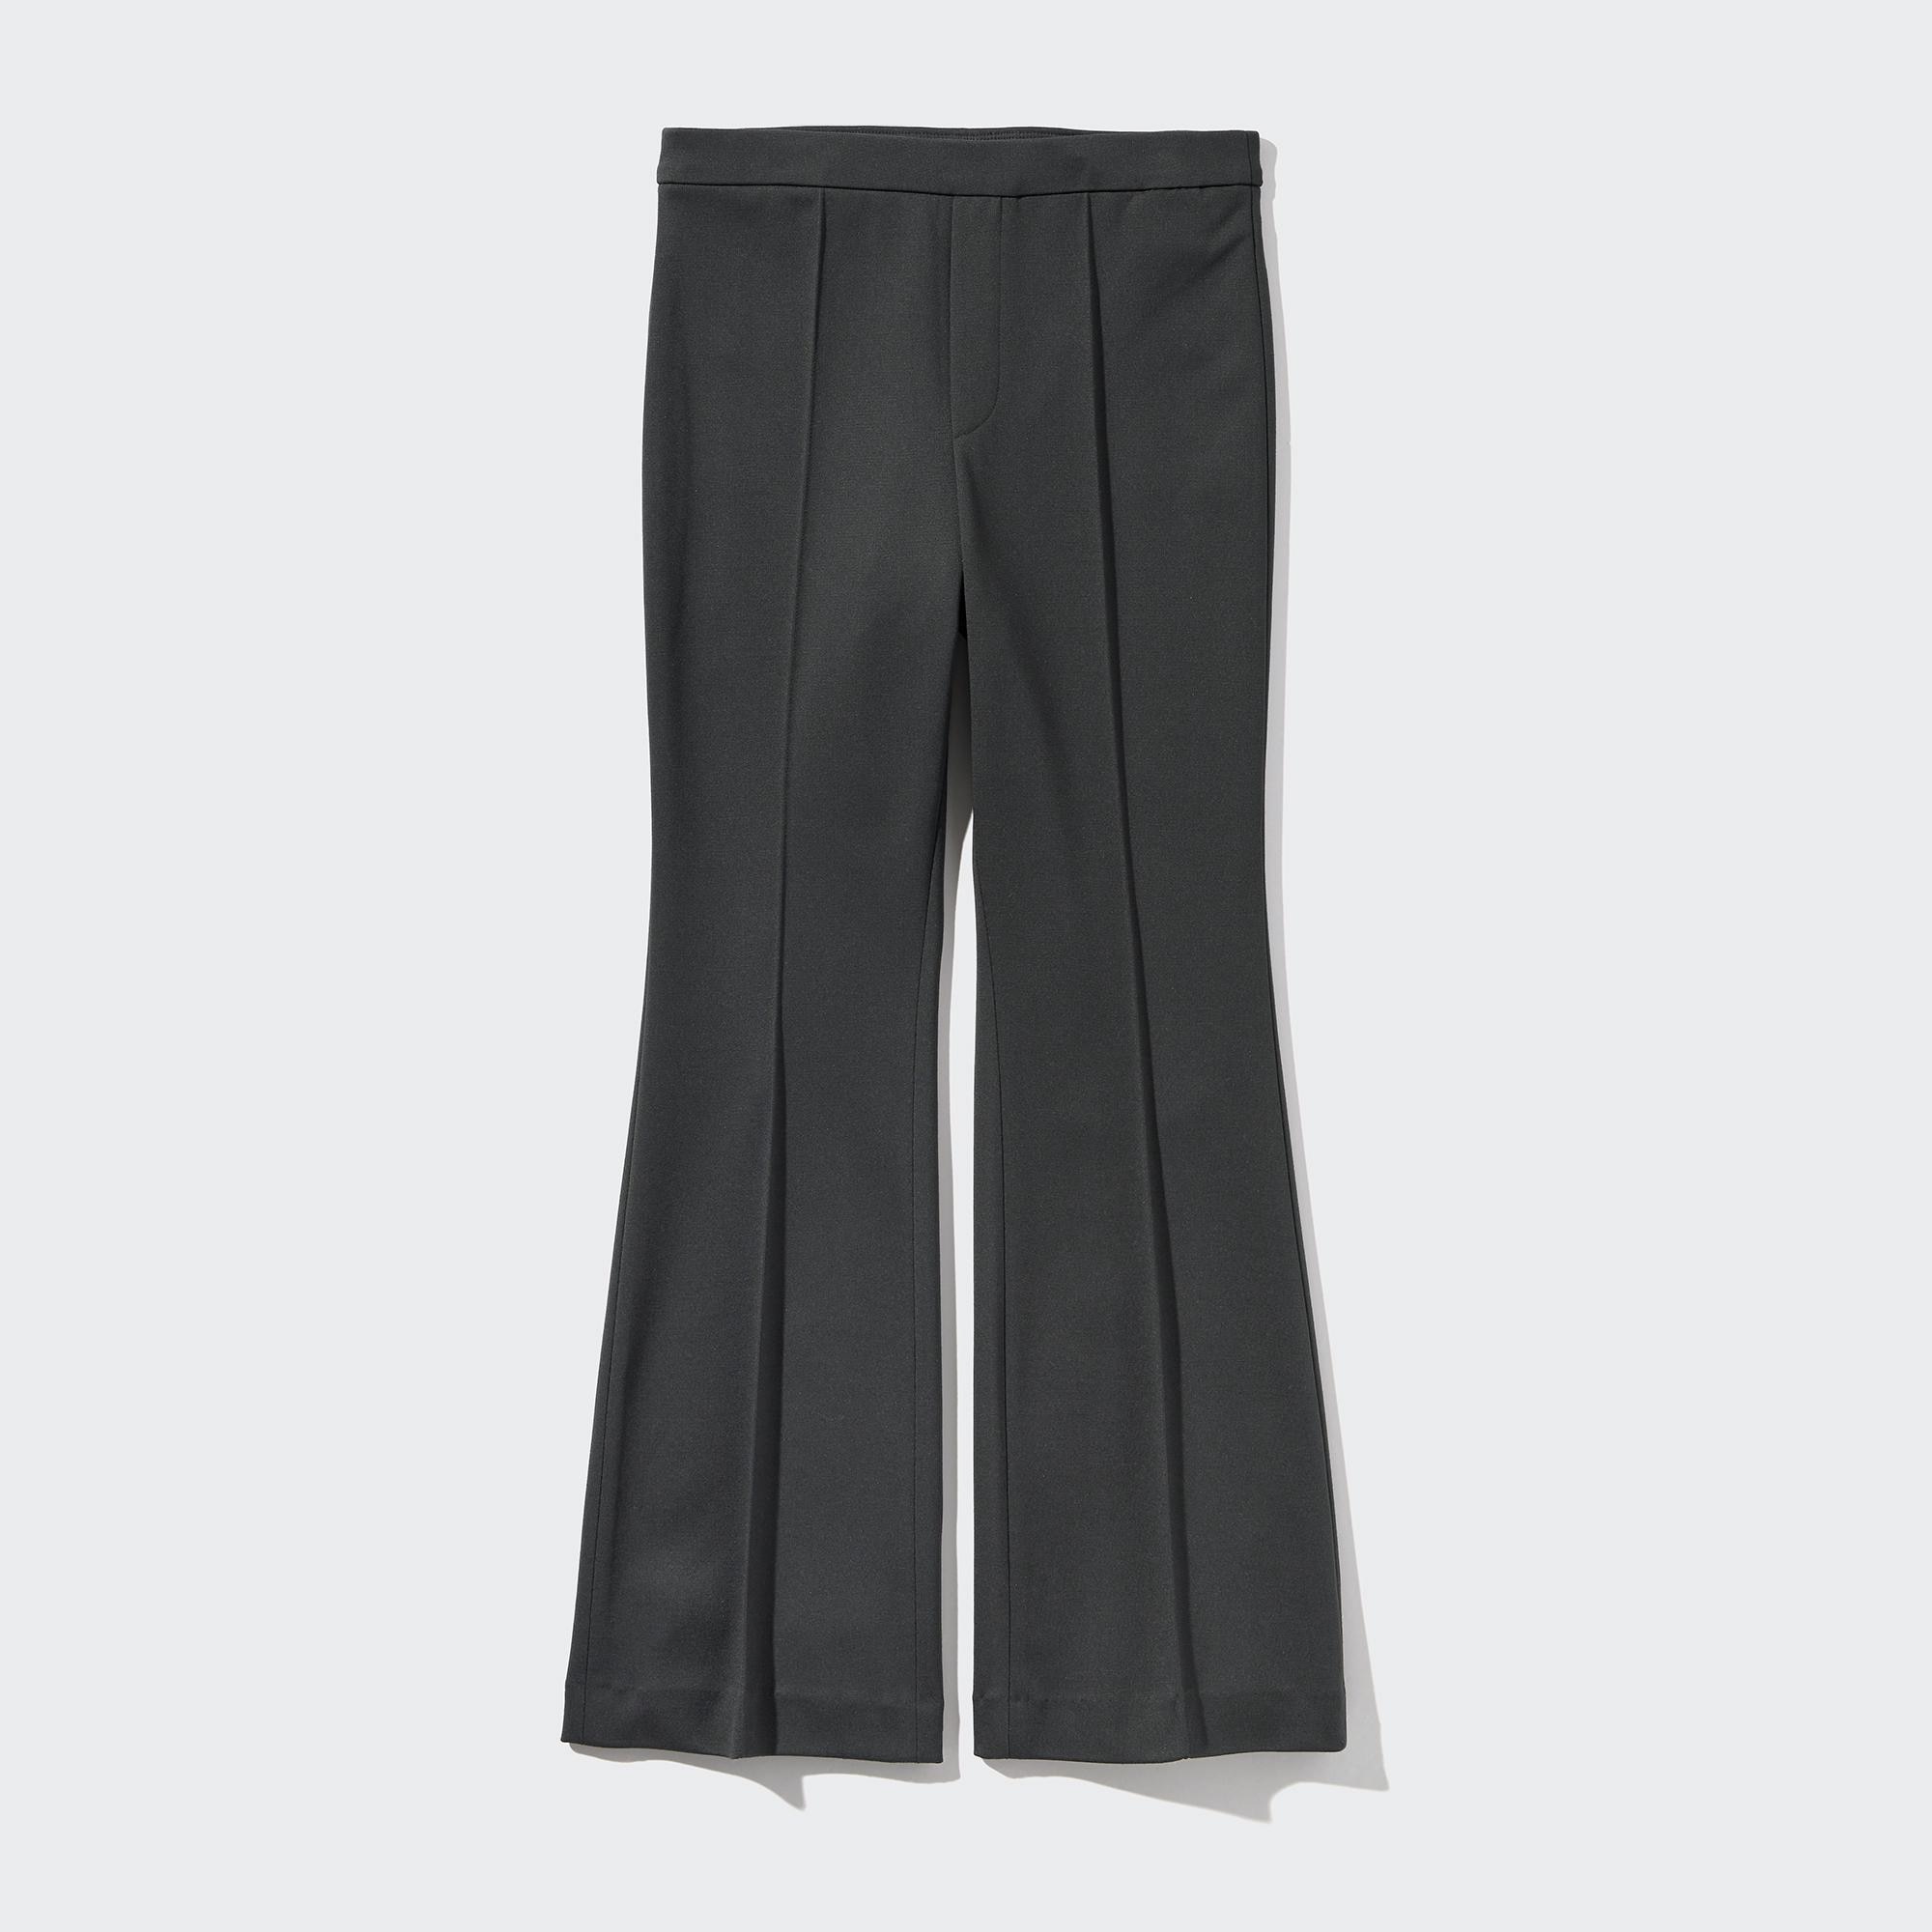 WOMENS EXTRA STRETCH MATERNITY LEGGINGS TROUSERS  UNIQLO IN